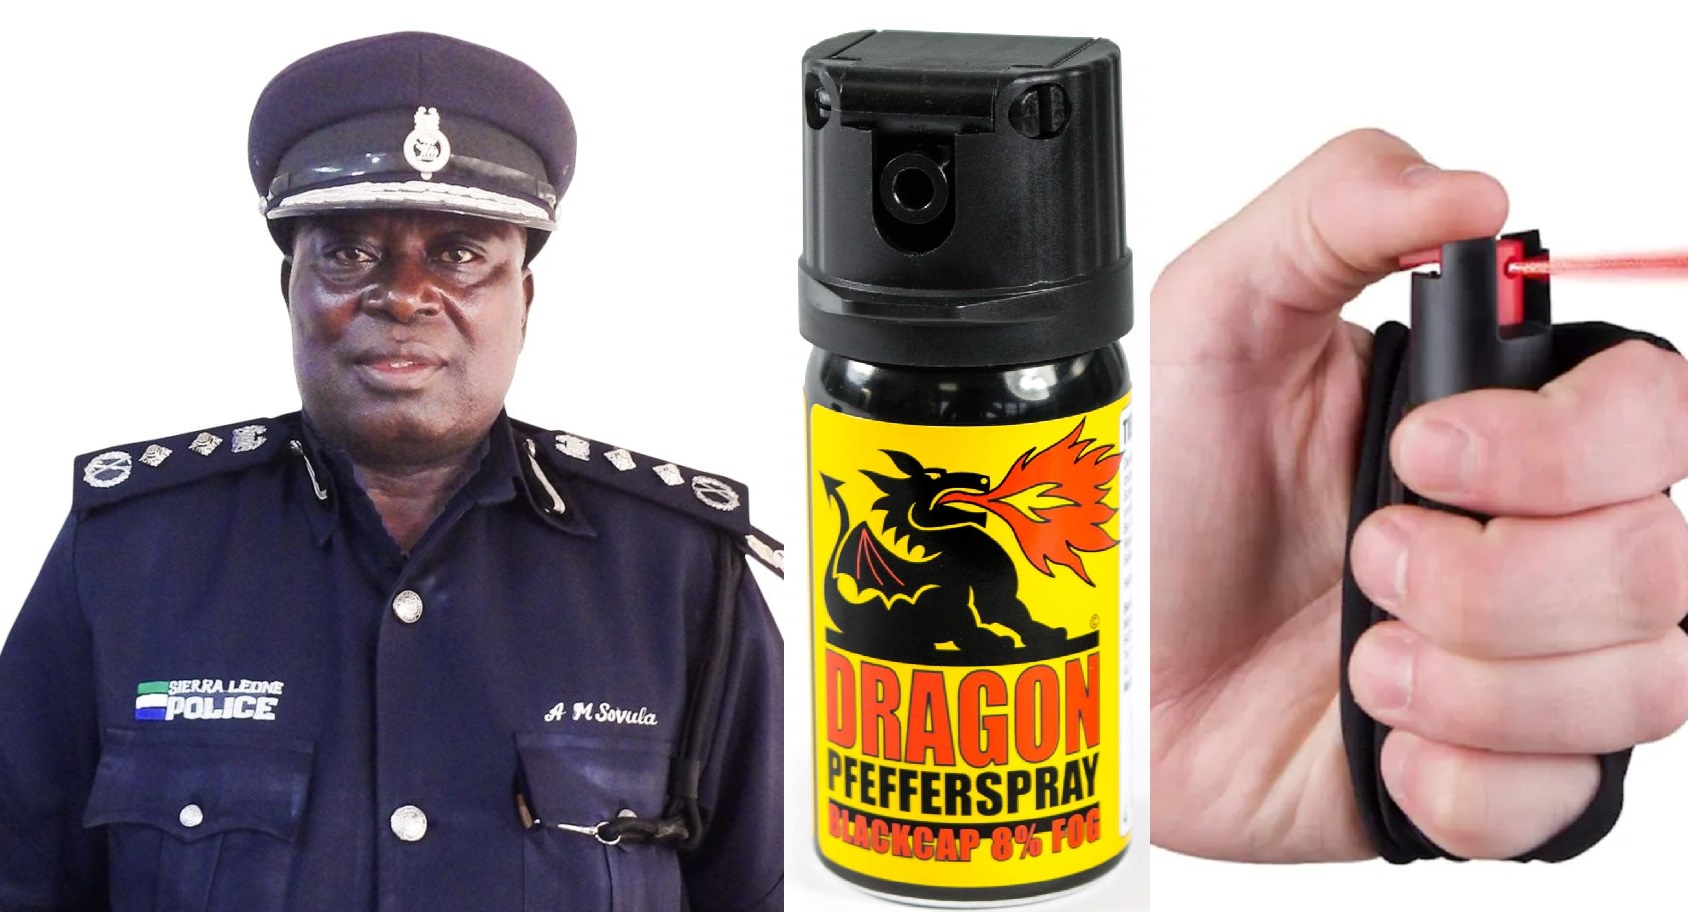 You Will Be Arrested if We Catch You With Pepper Spray – Sierra Leone Police Sends Out Serious Warning